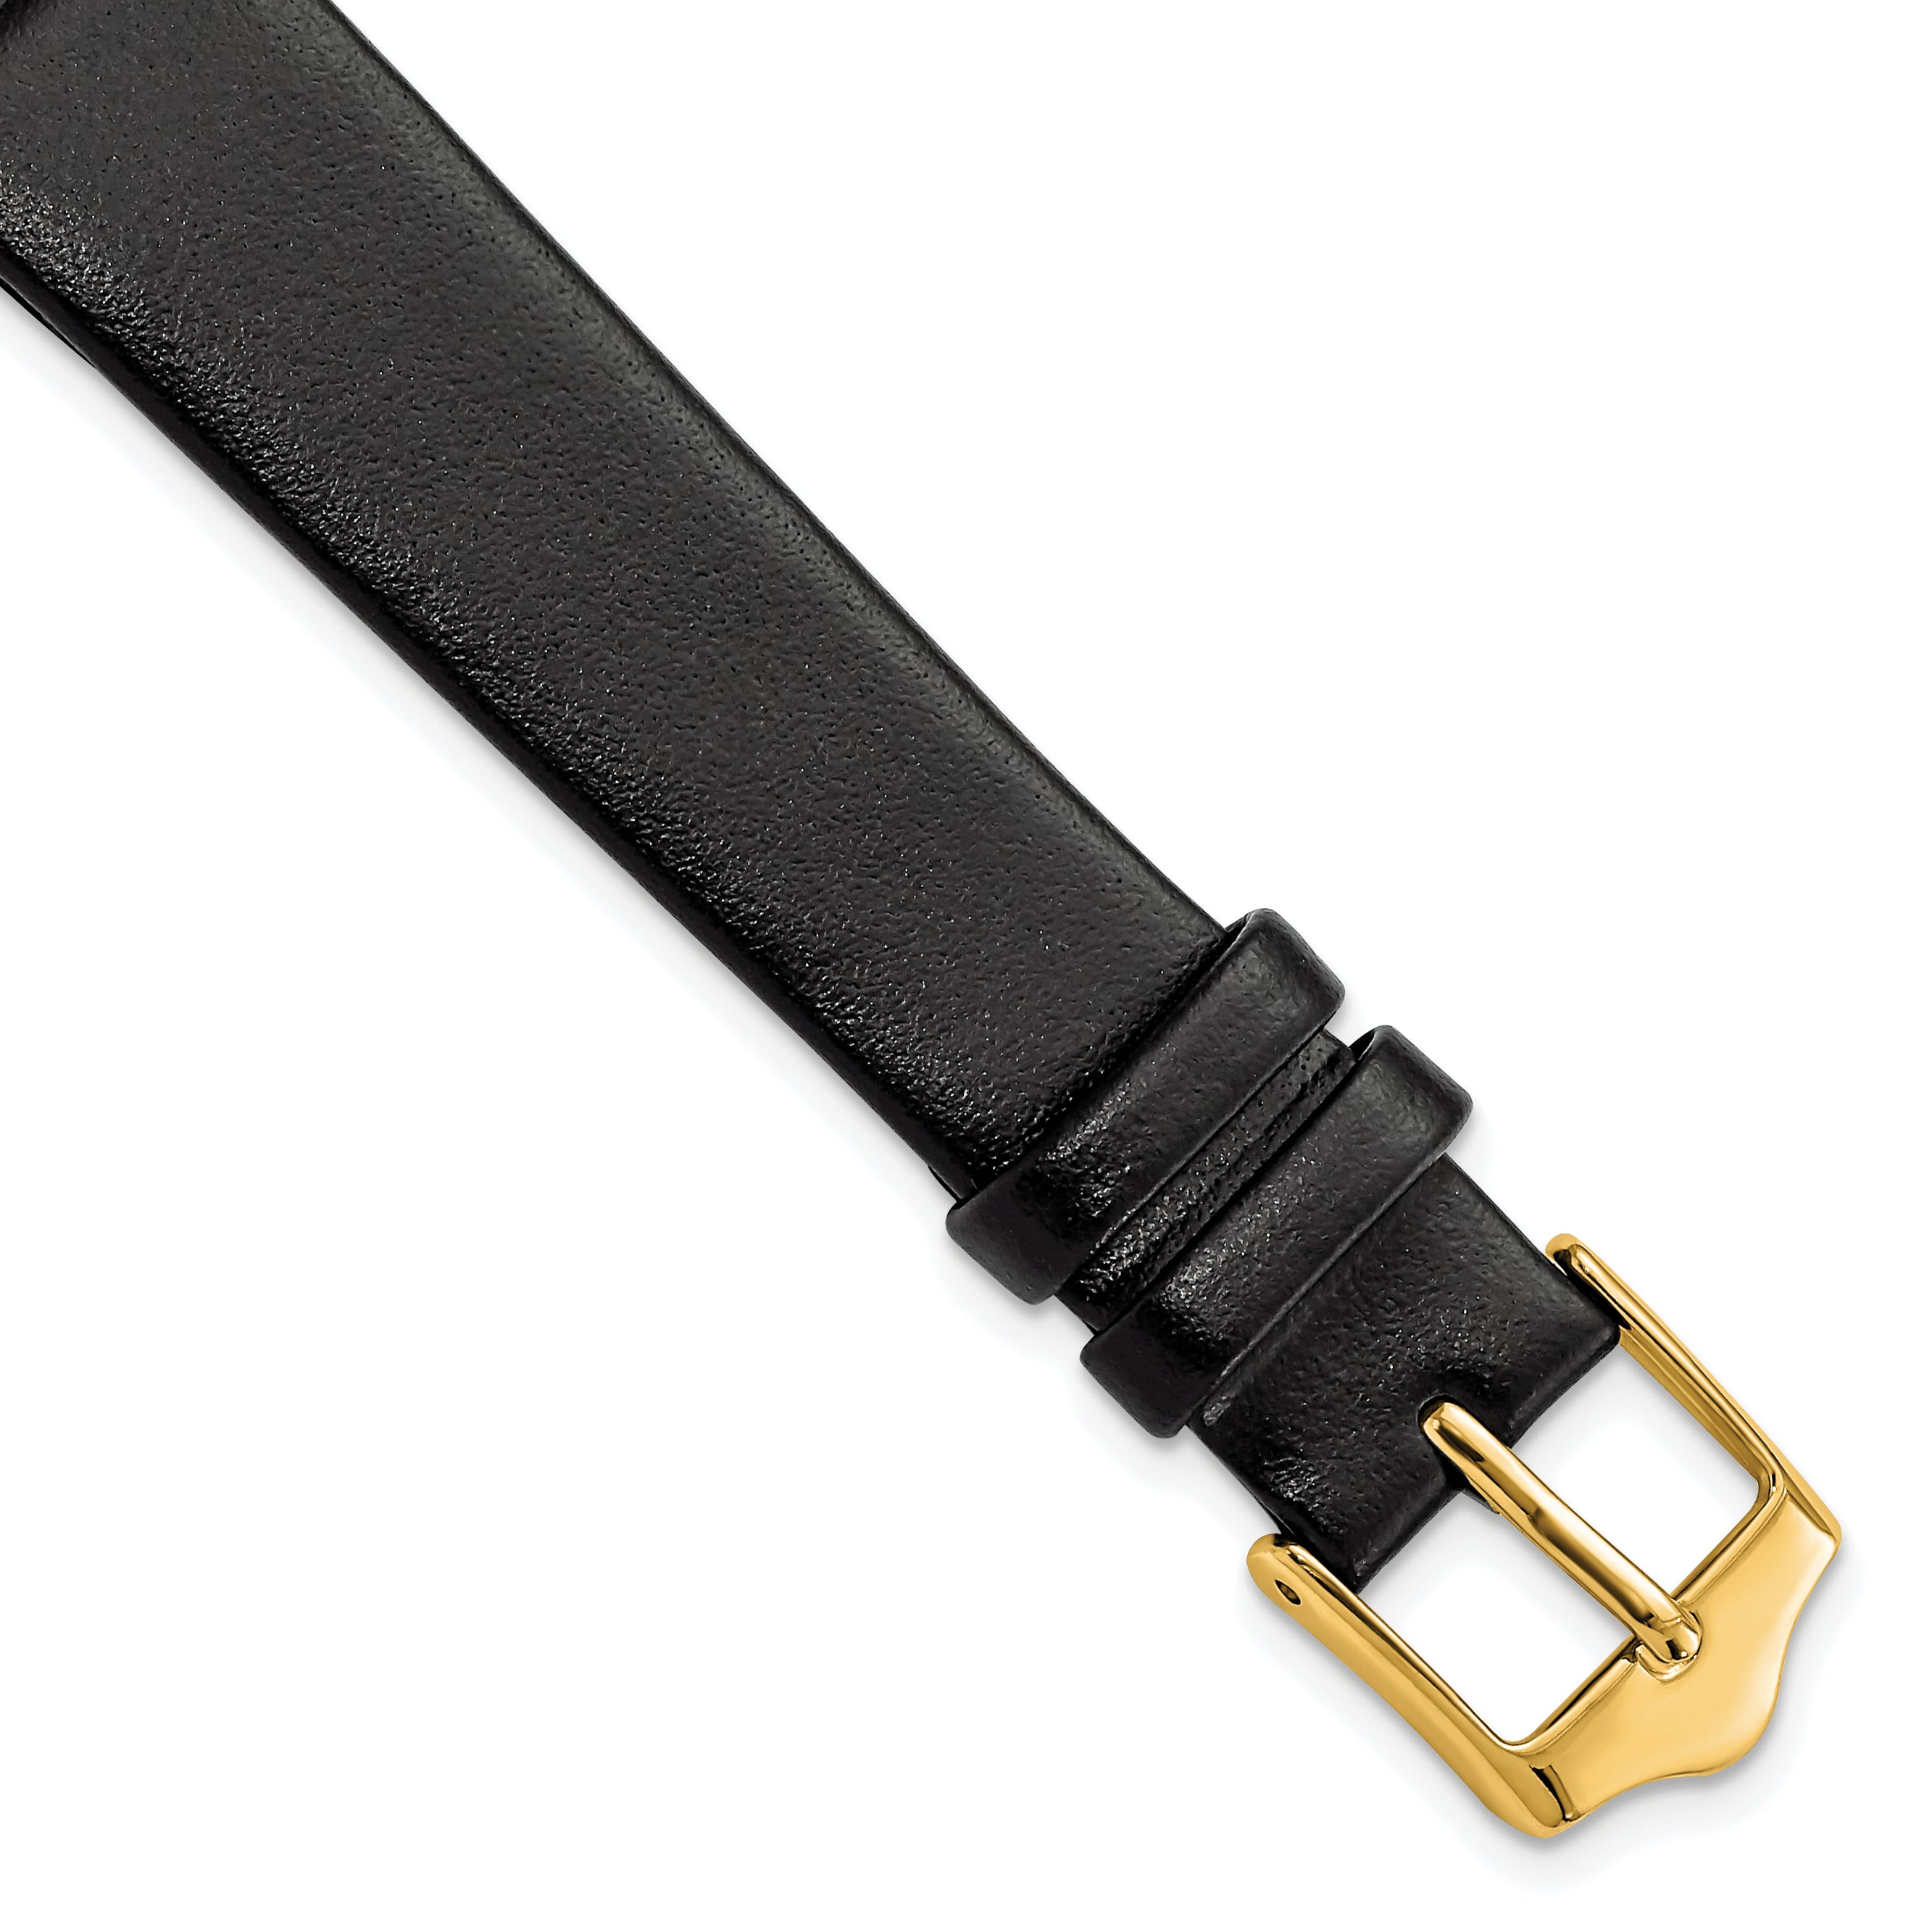 DeBeer 14mm Black Smooth Flat Leather with Gold-tone Buckle 6.75 inch Watch Band